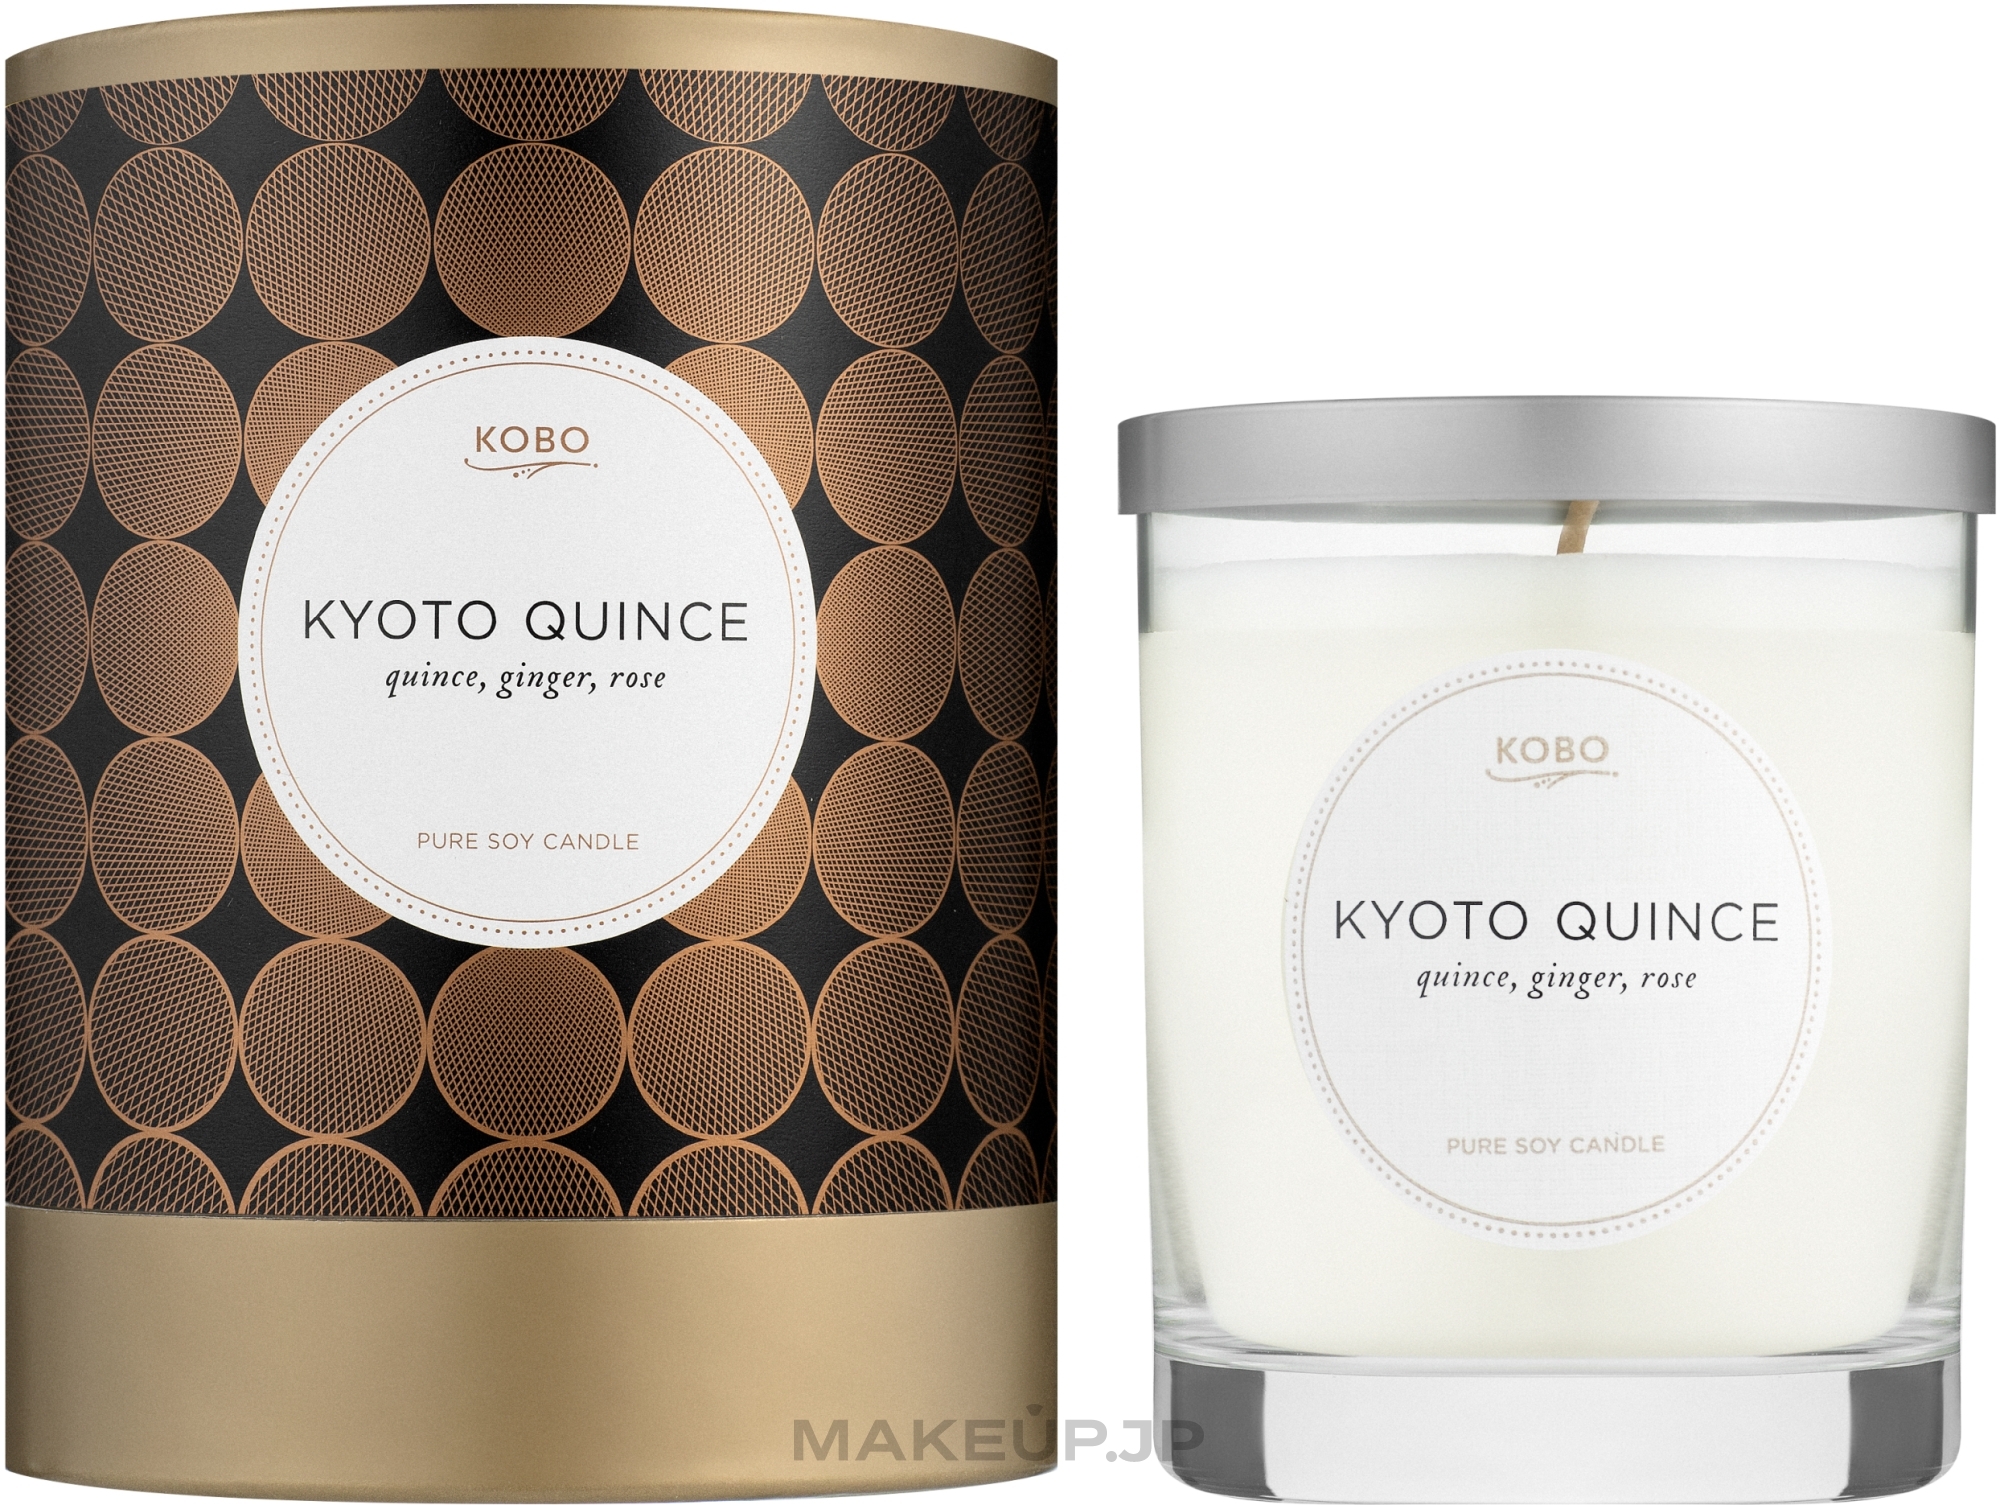 Kobo Kyoto Quince - Scented Candle — photo 312 g